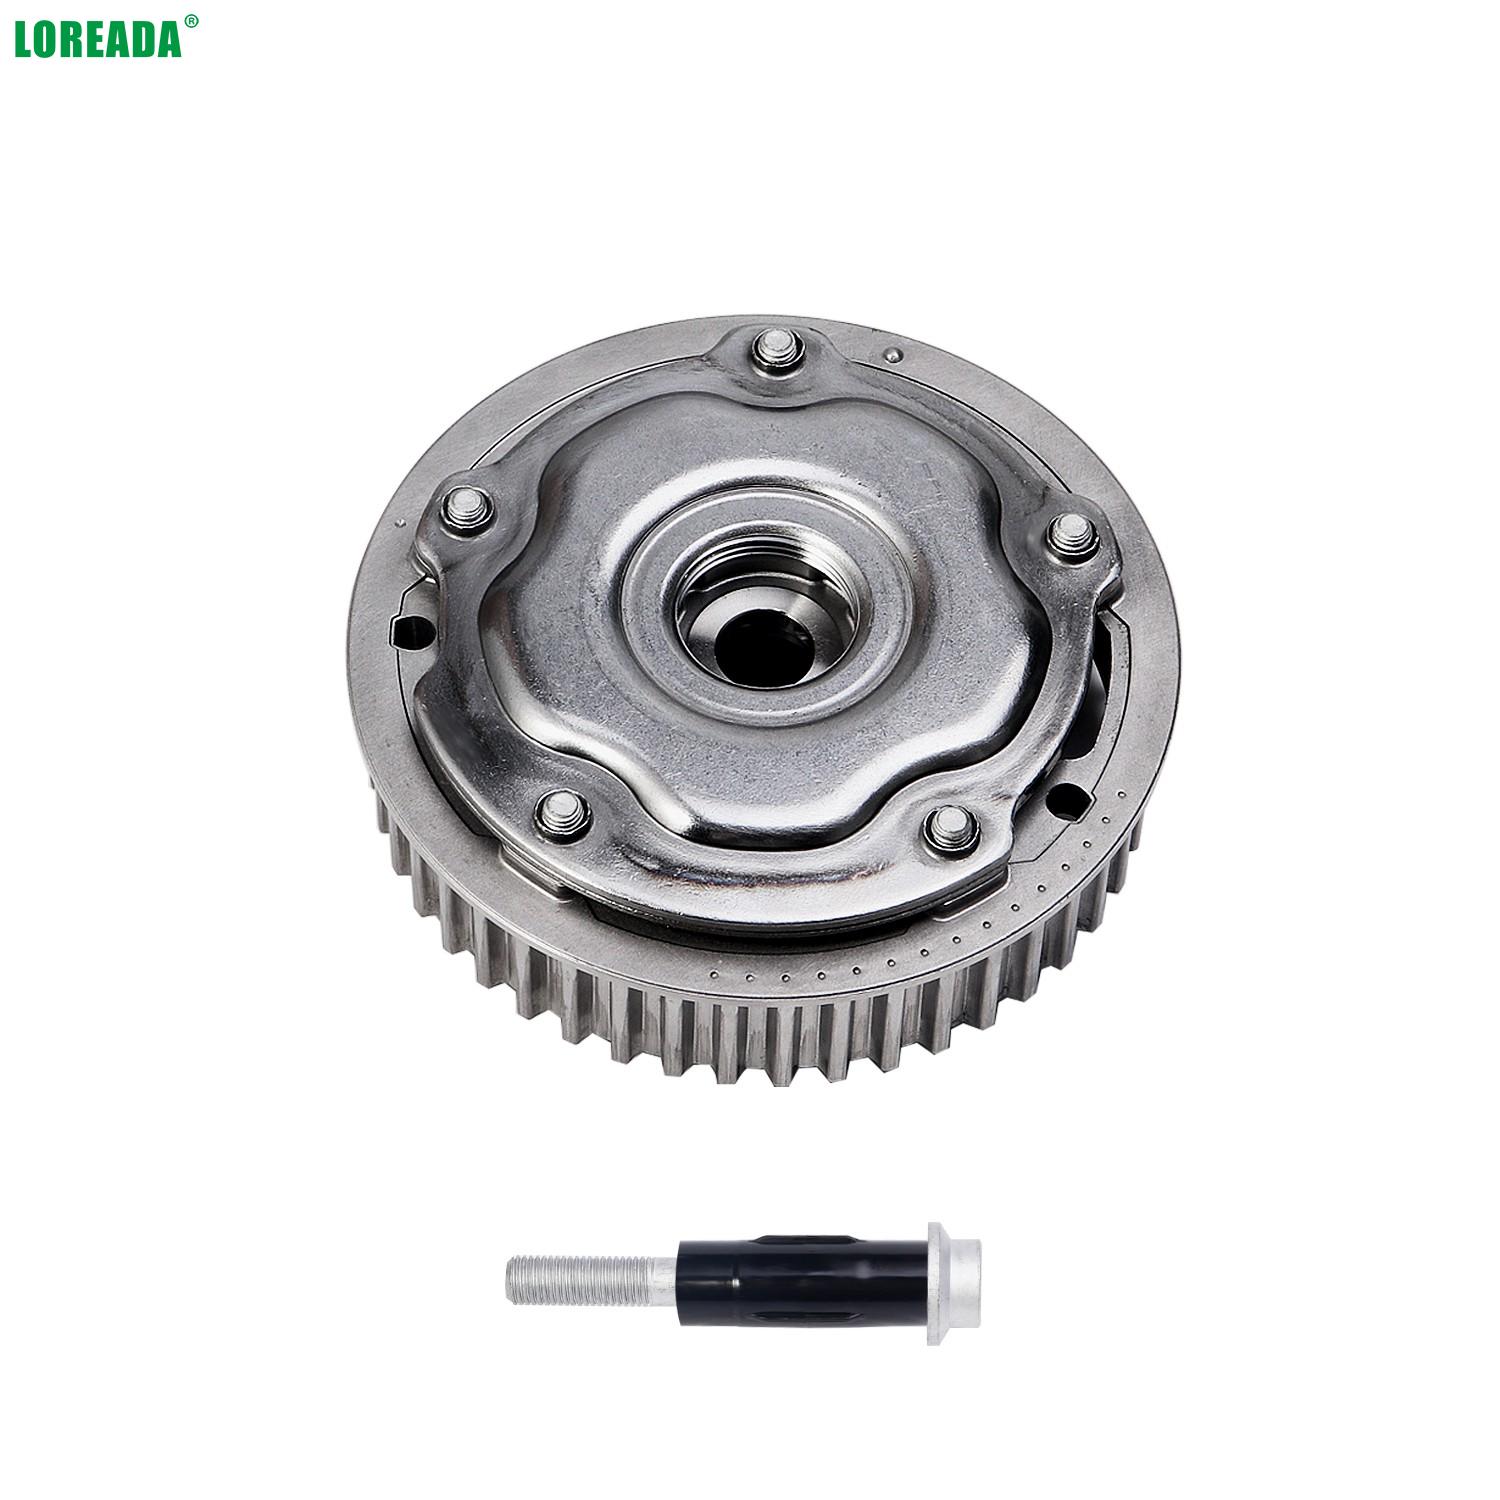  LOREADA Intake Exhaust Engine Timing Camshaft Cam Gear OEM For Chevrolet- Aveo Cruze Sonic Opel Vauxhall Astra 55567048 55568386 55567049